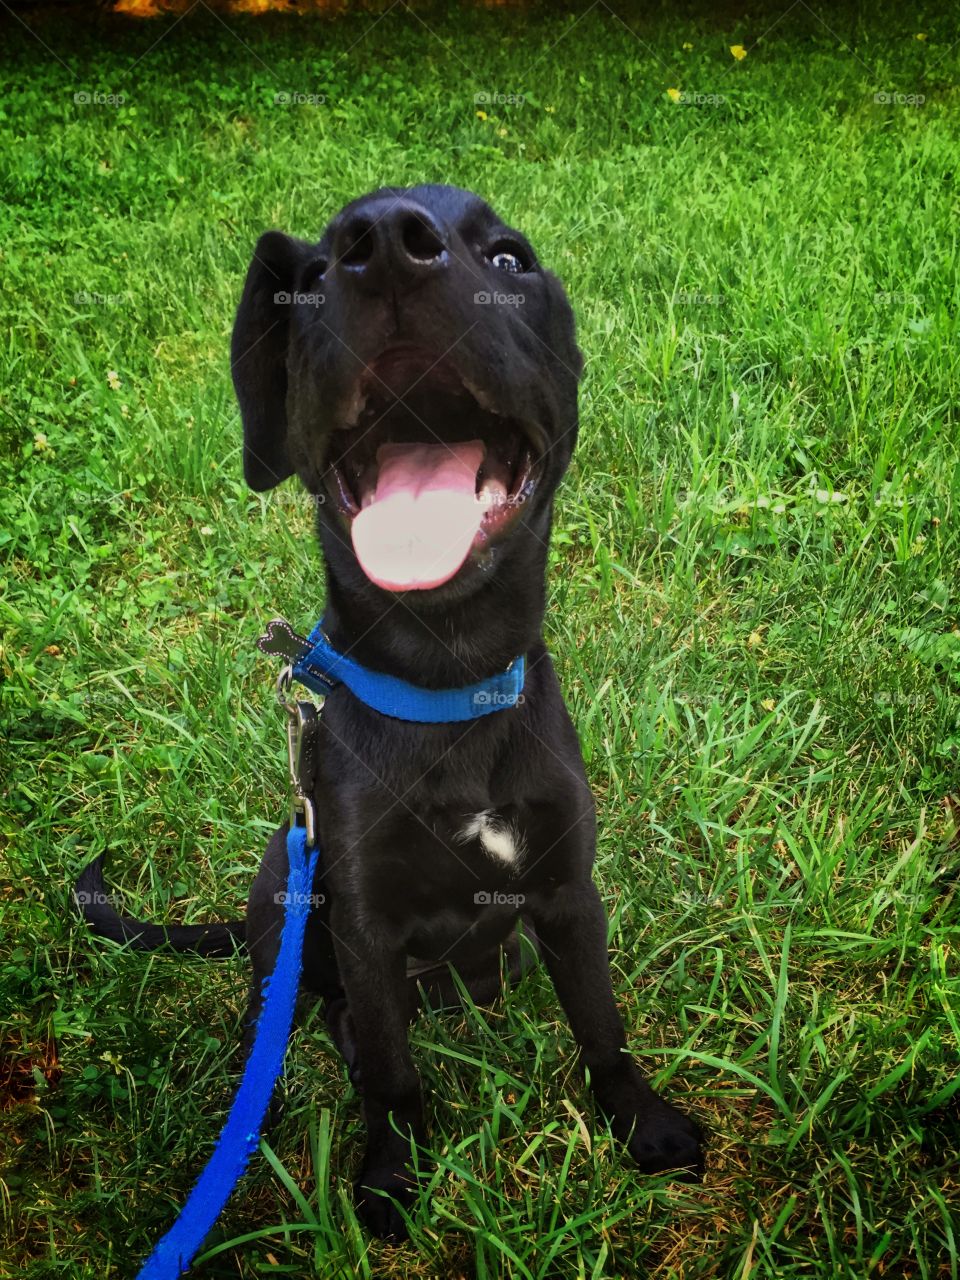 Black puppy with a blue collar and leash looking very happy looking at the lens while sitting on grass